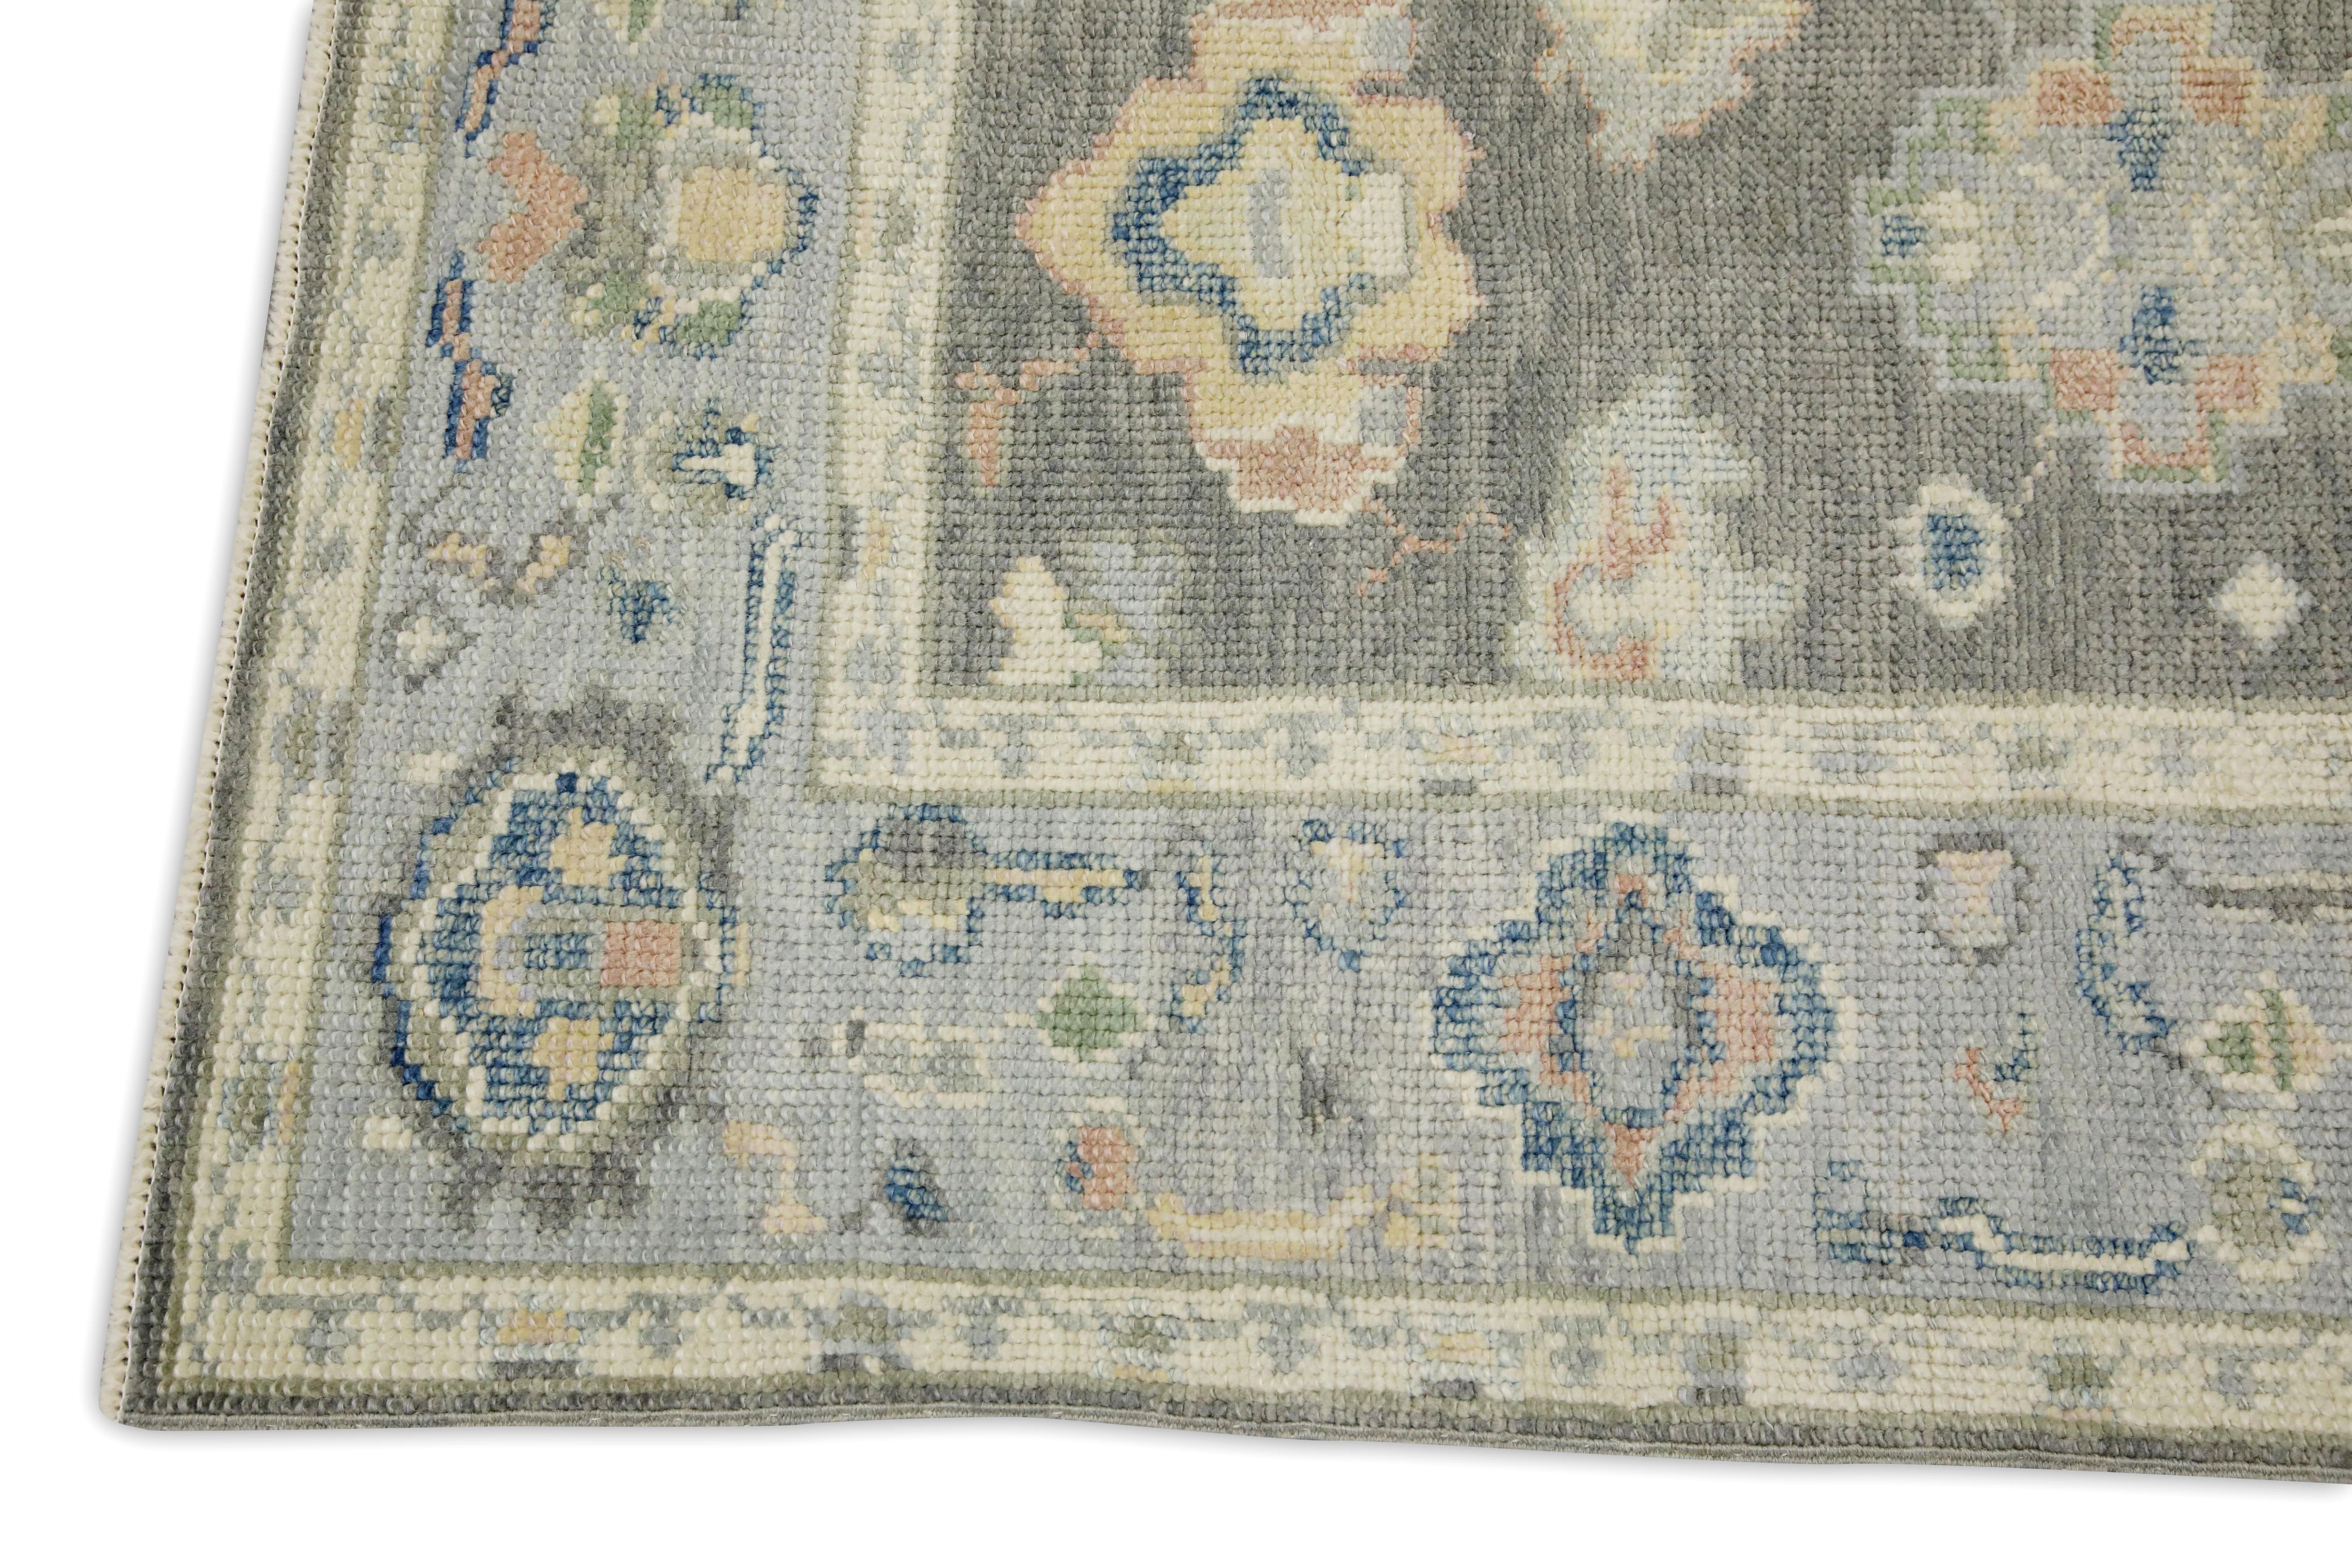 Hand-Woven Charcoal & Blue Floral Design Handwoven Wool Turkish Oushak Rug 3' x 4'9